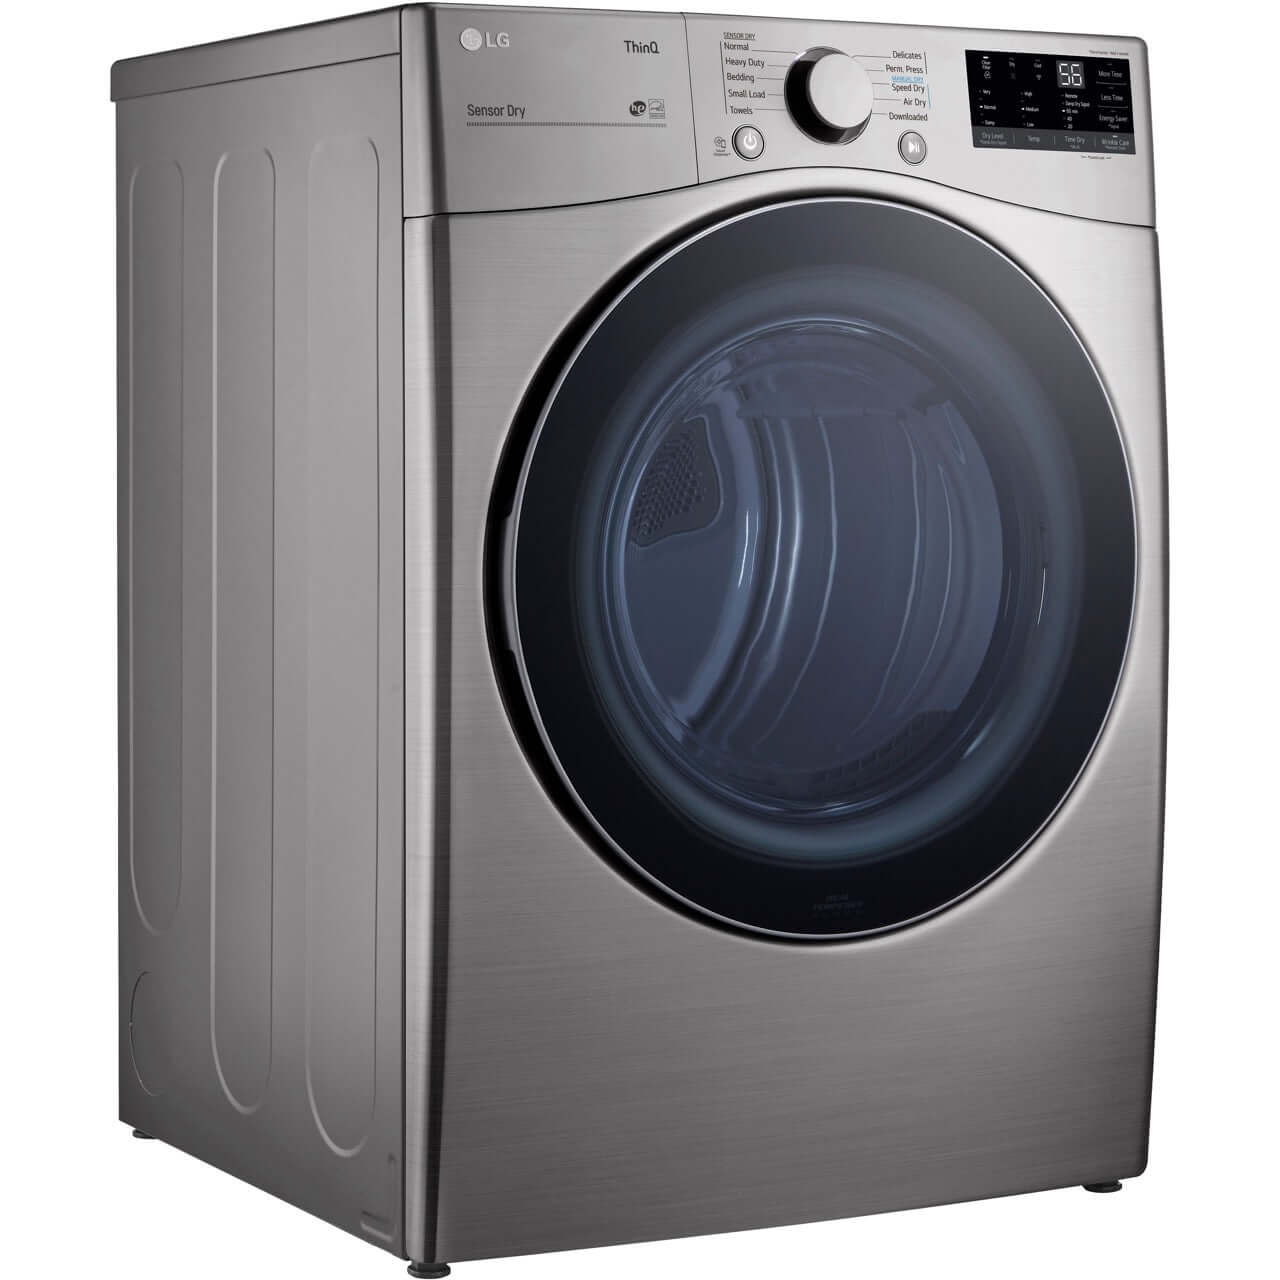 LG 27 In. 7.4-Cu. Ft. Front Load Electric Dryer with Built-In Intelligence in Graphite Steel (DLE3600V)